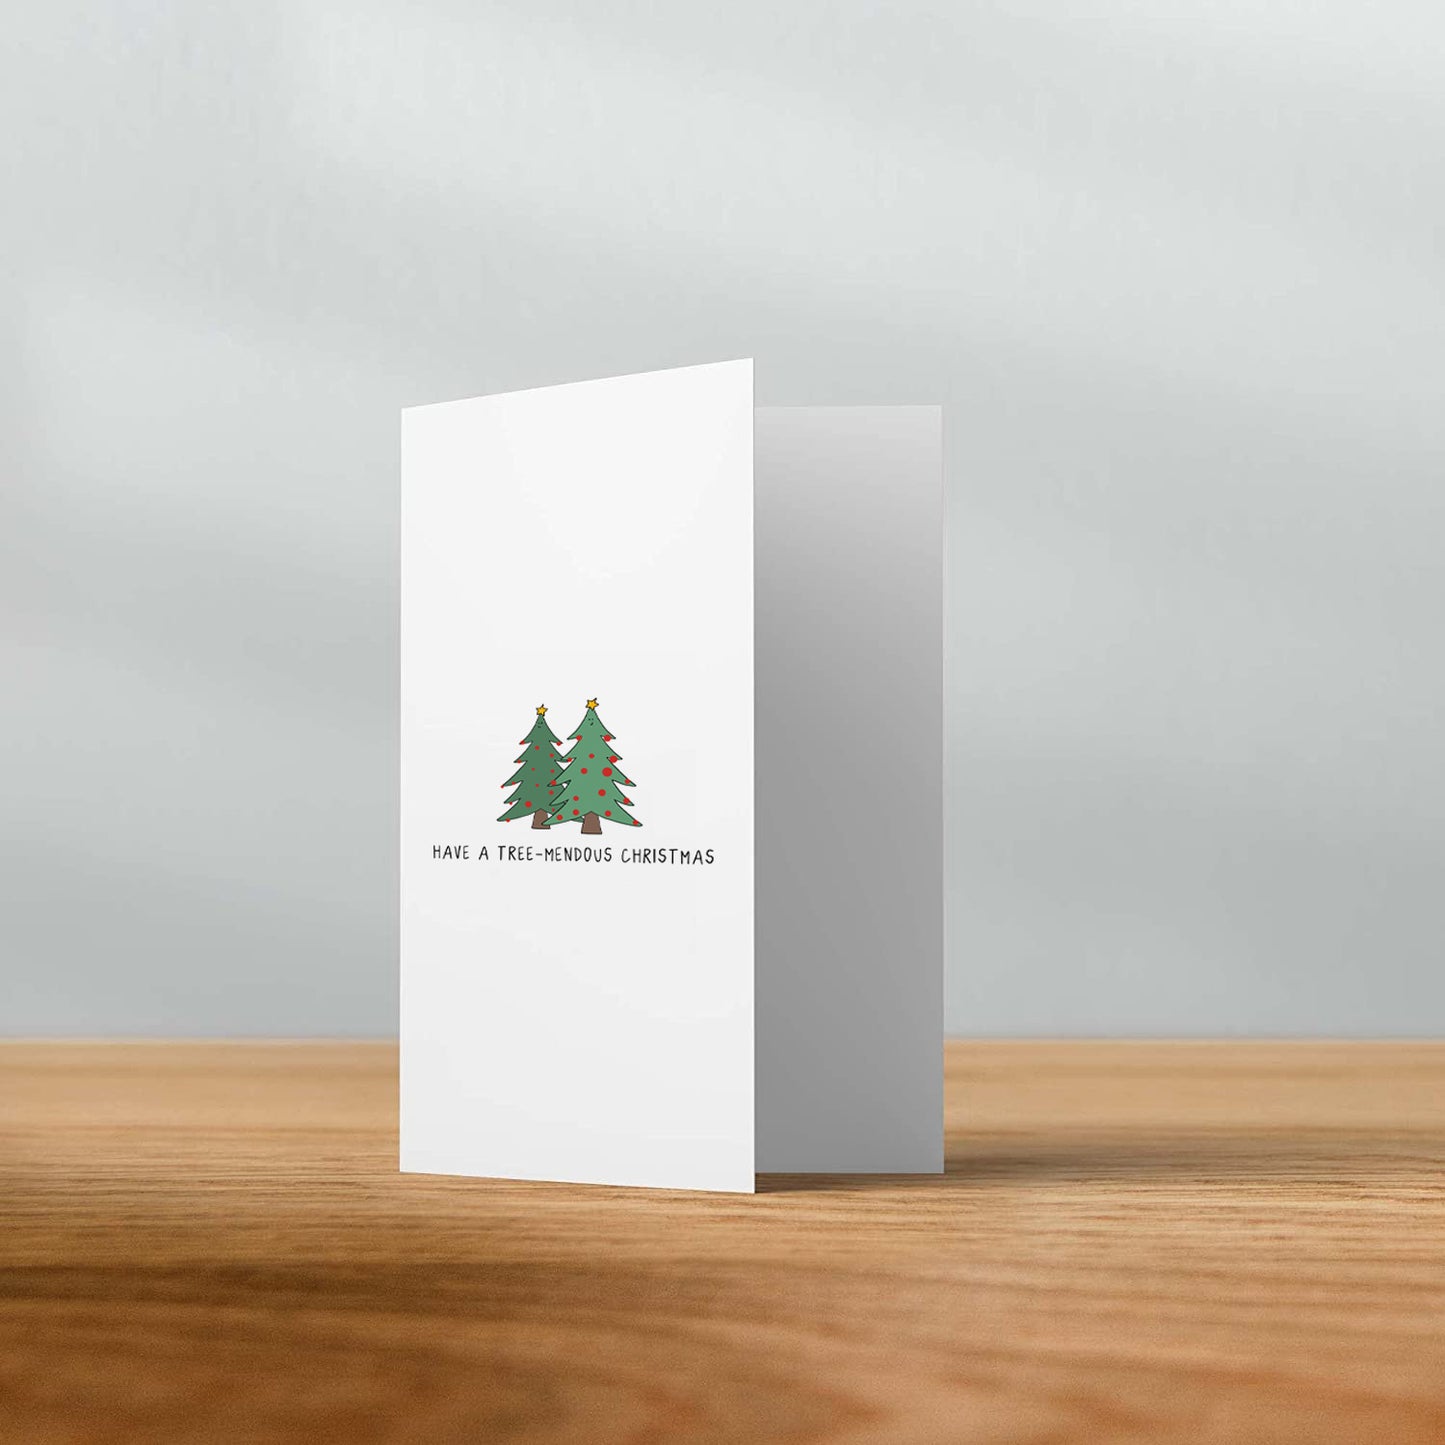 A Have A Tree-Mendous Christmas Card from rockdoodles with a beautiful Christmas tree on it.